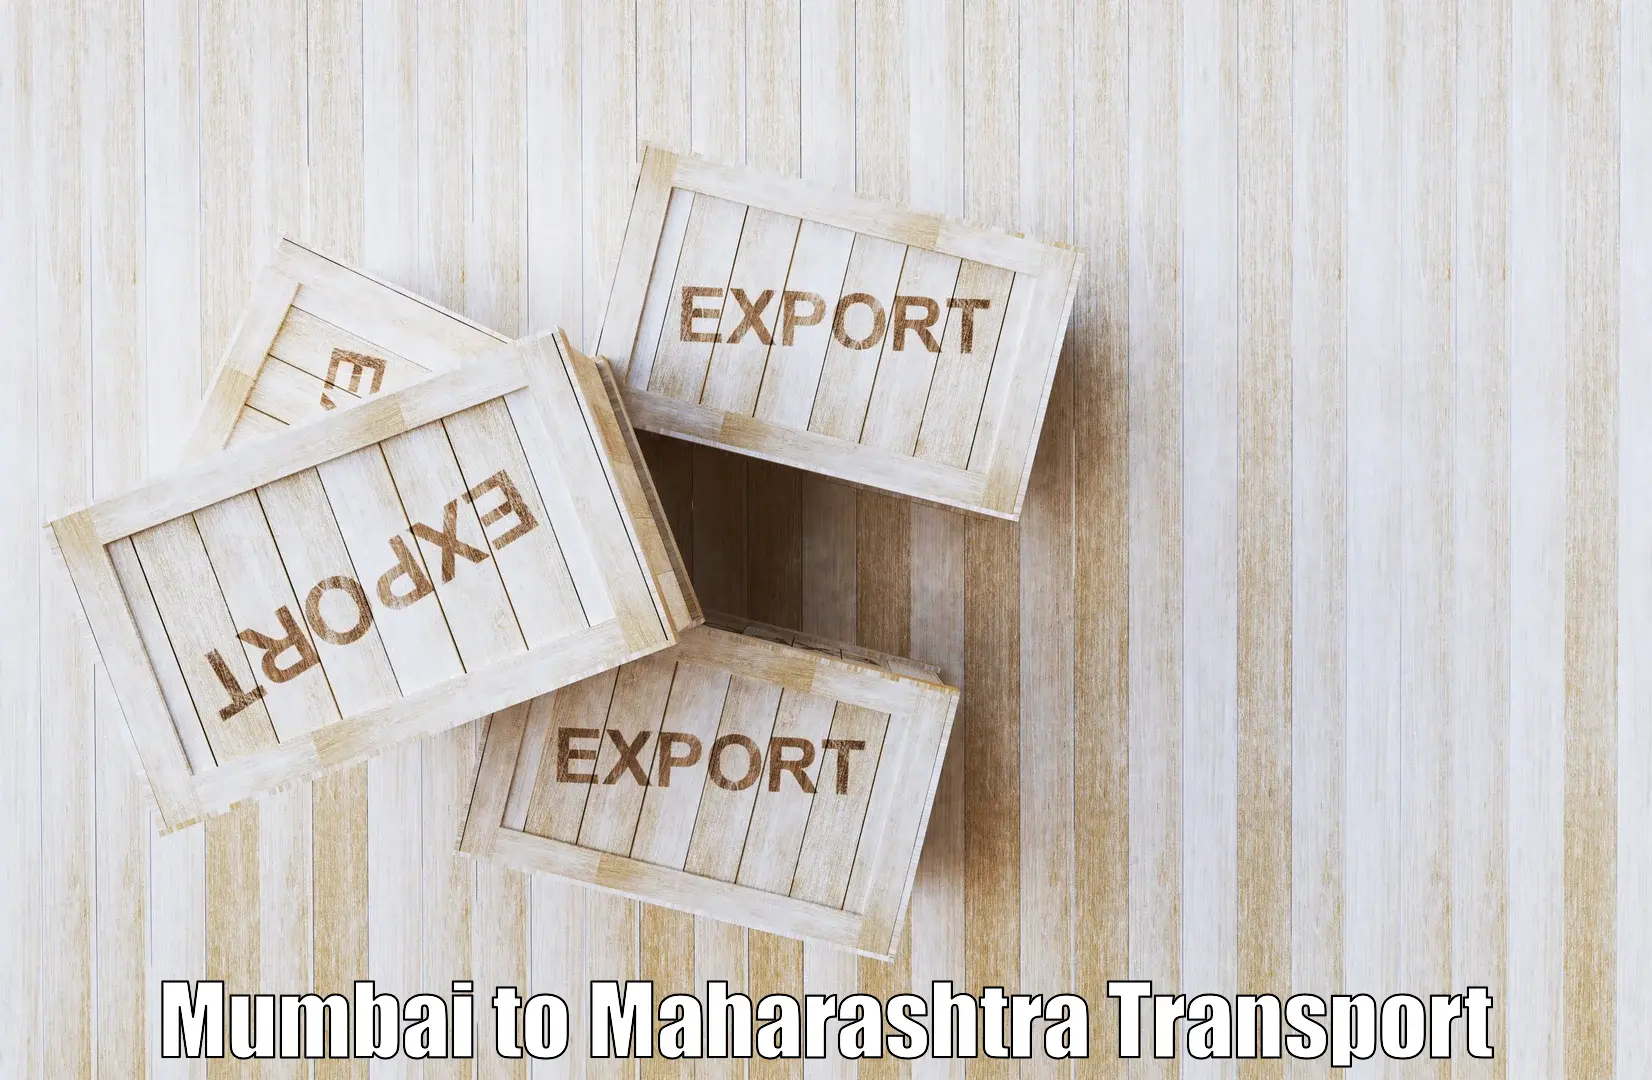 Interstate transport services Mumbai to Talere